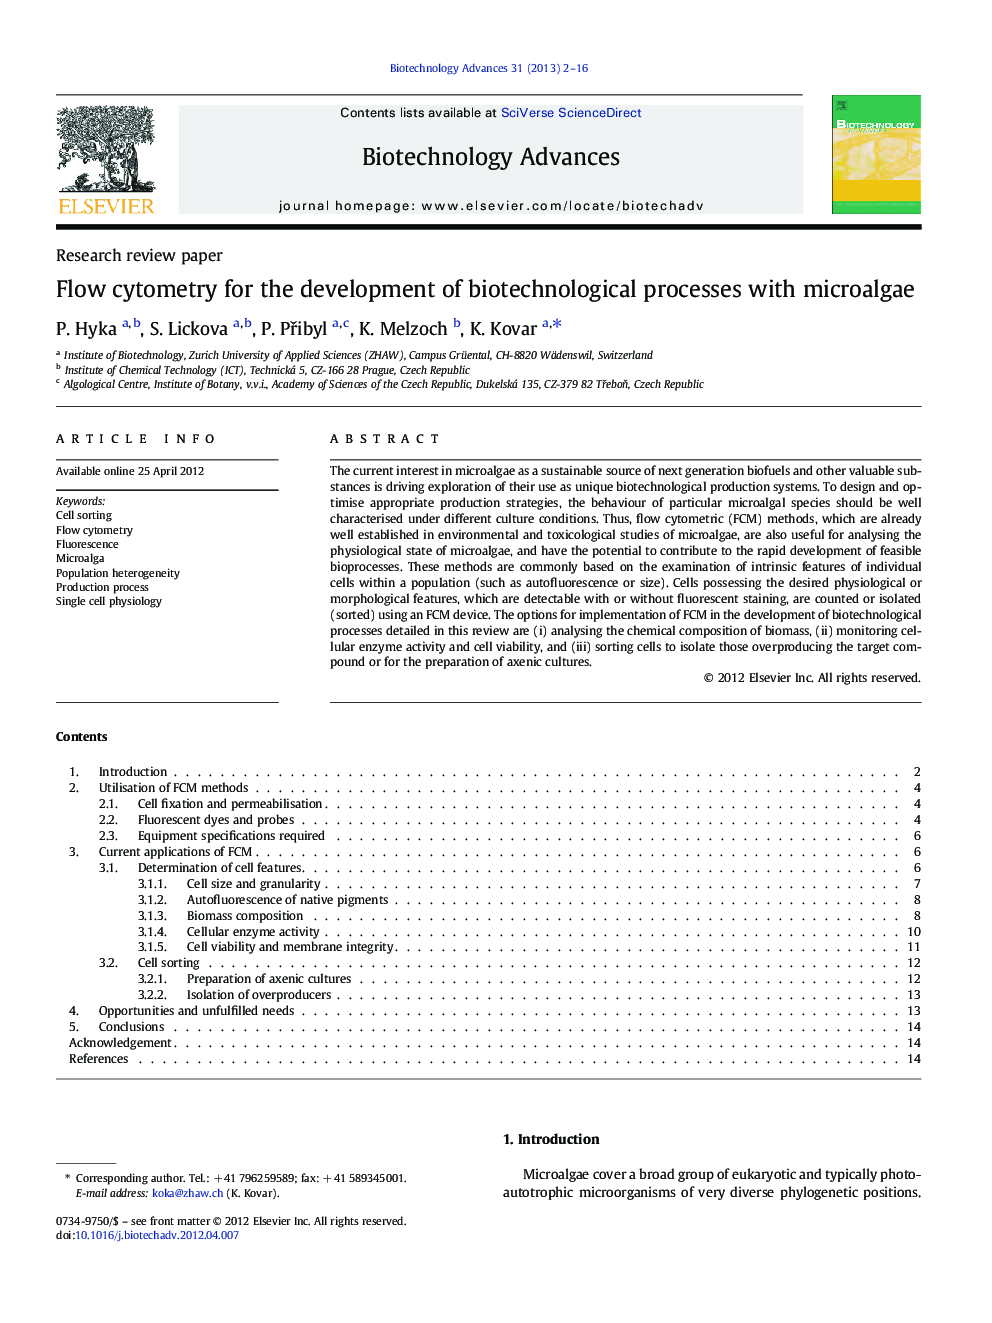 Flow cytometry for the development of biotechnological processes with microalgae